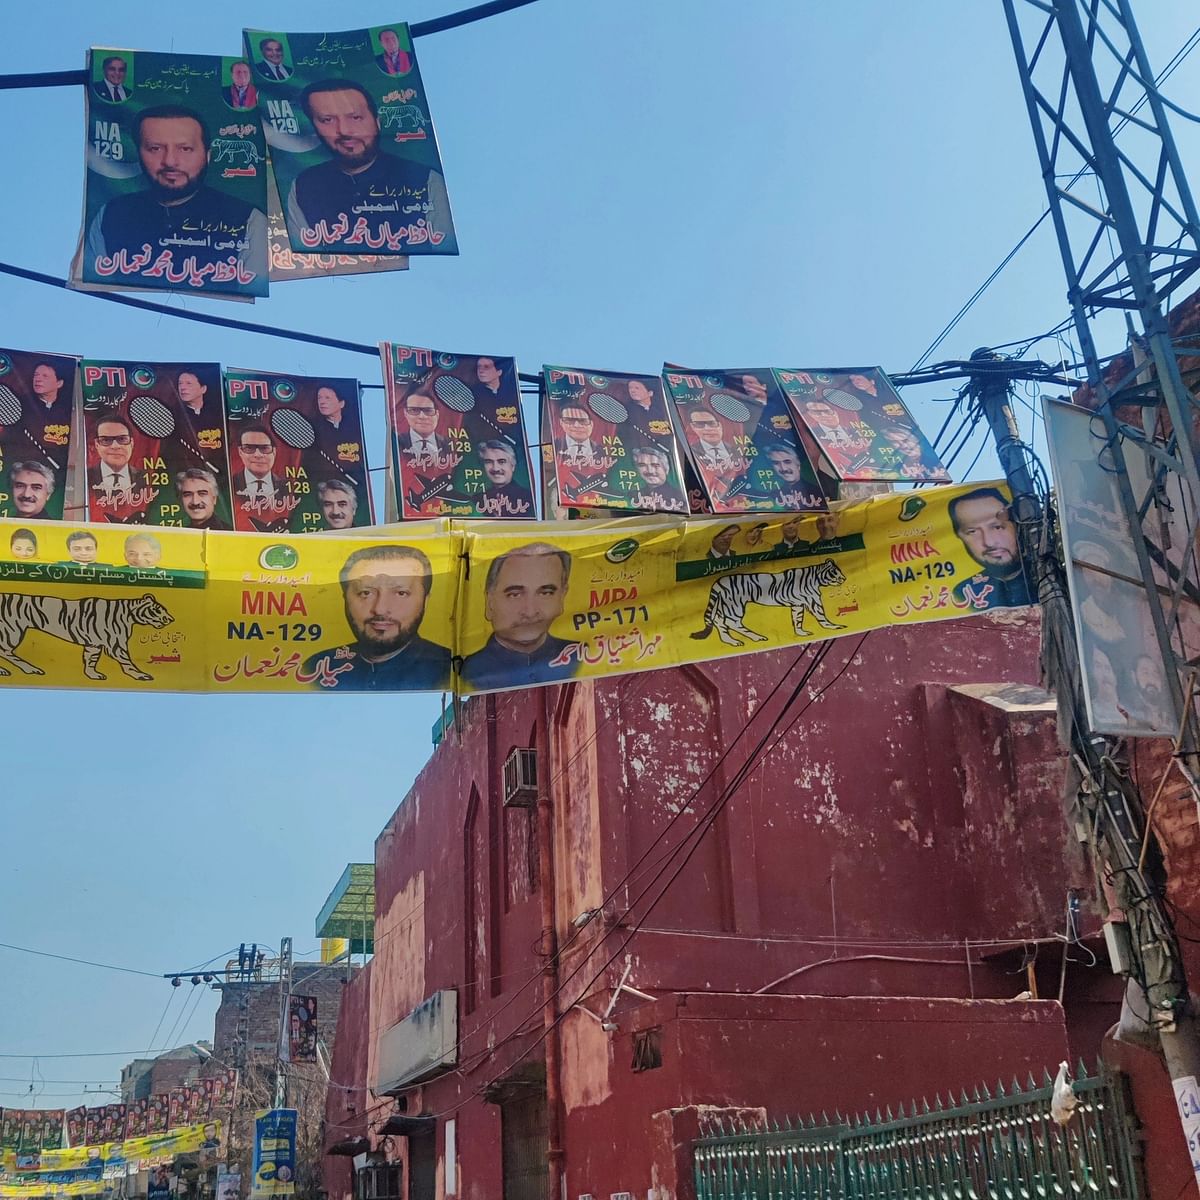 "I have personally seen PTI posters being taken down by the municipal authorities just last week," says Imran Hamid.